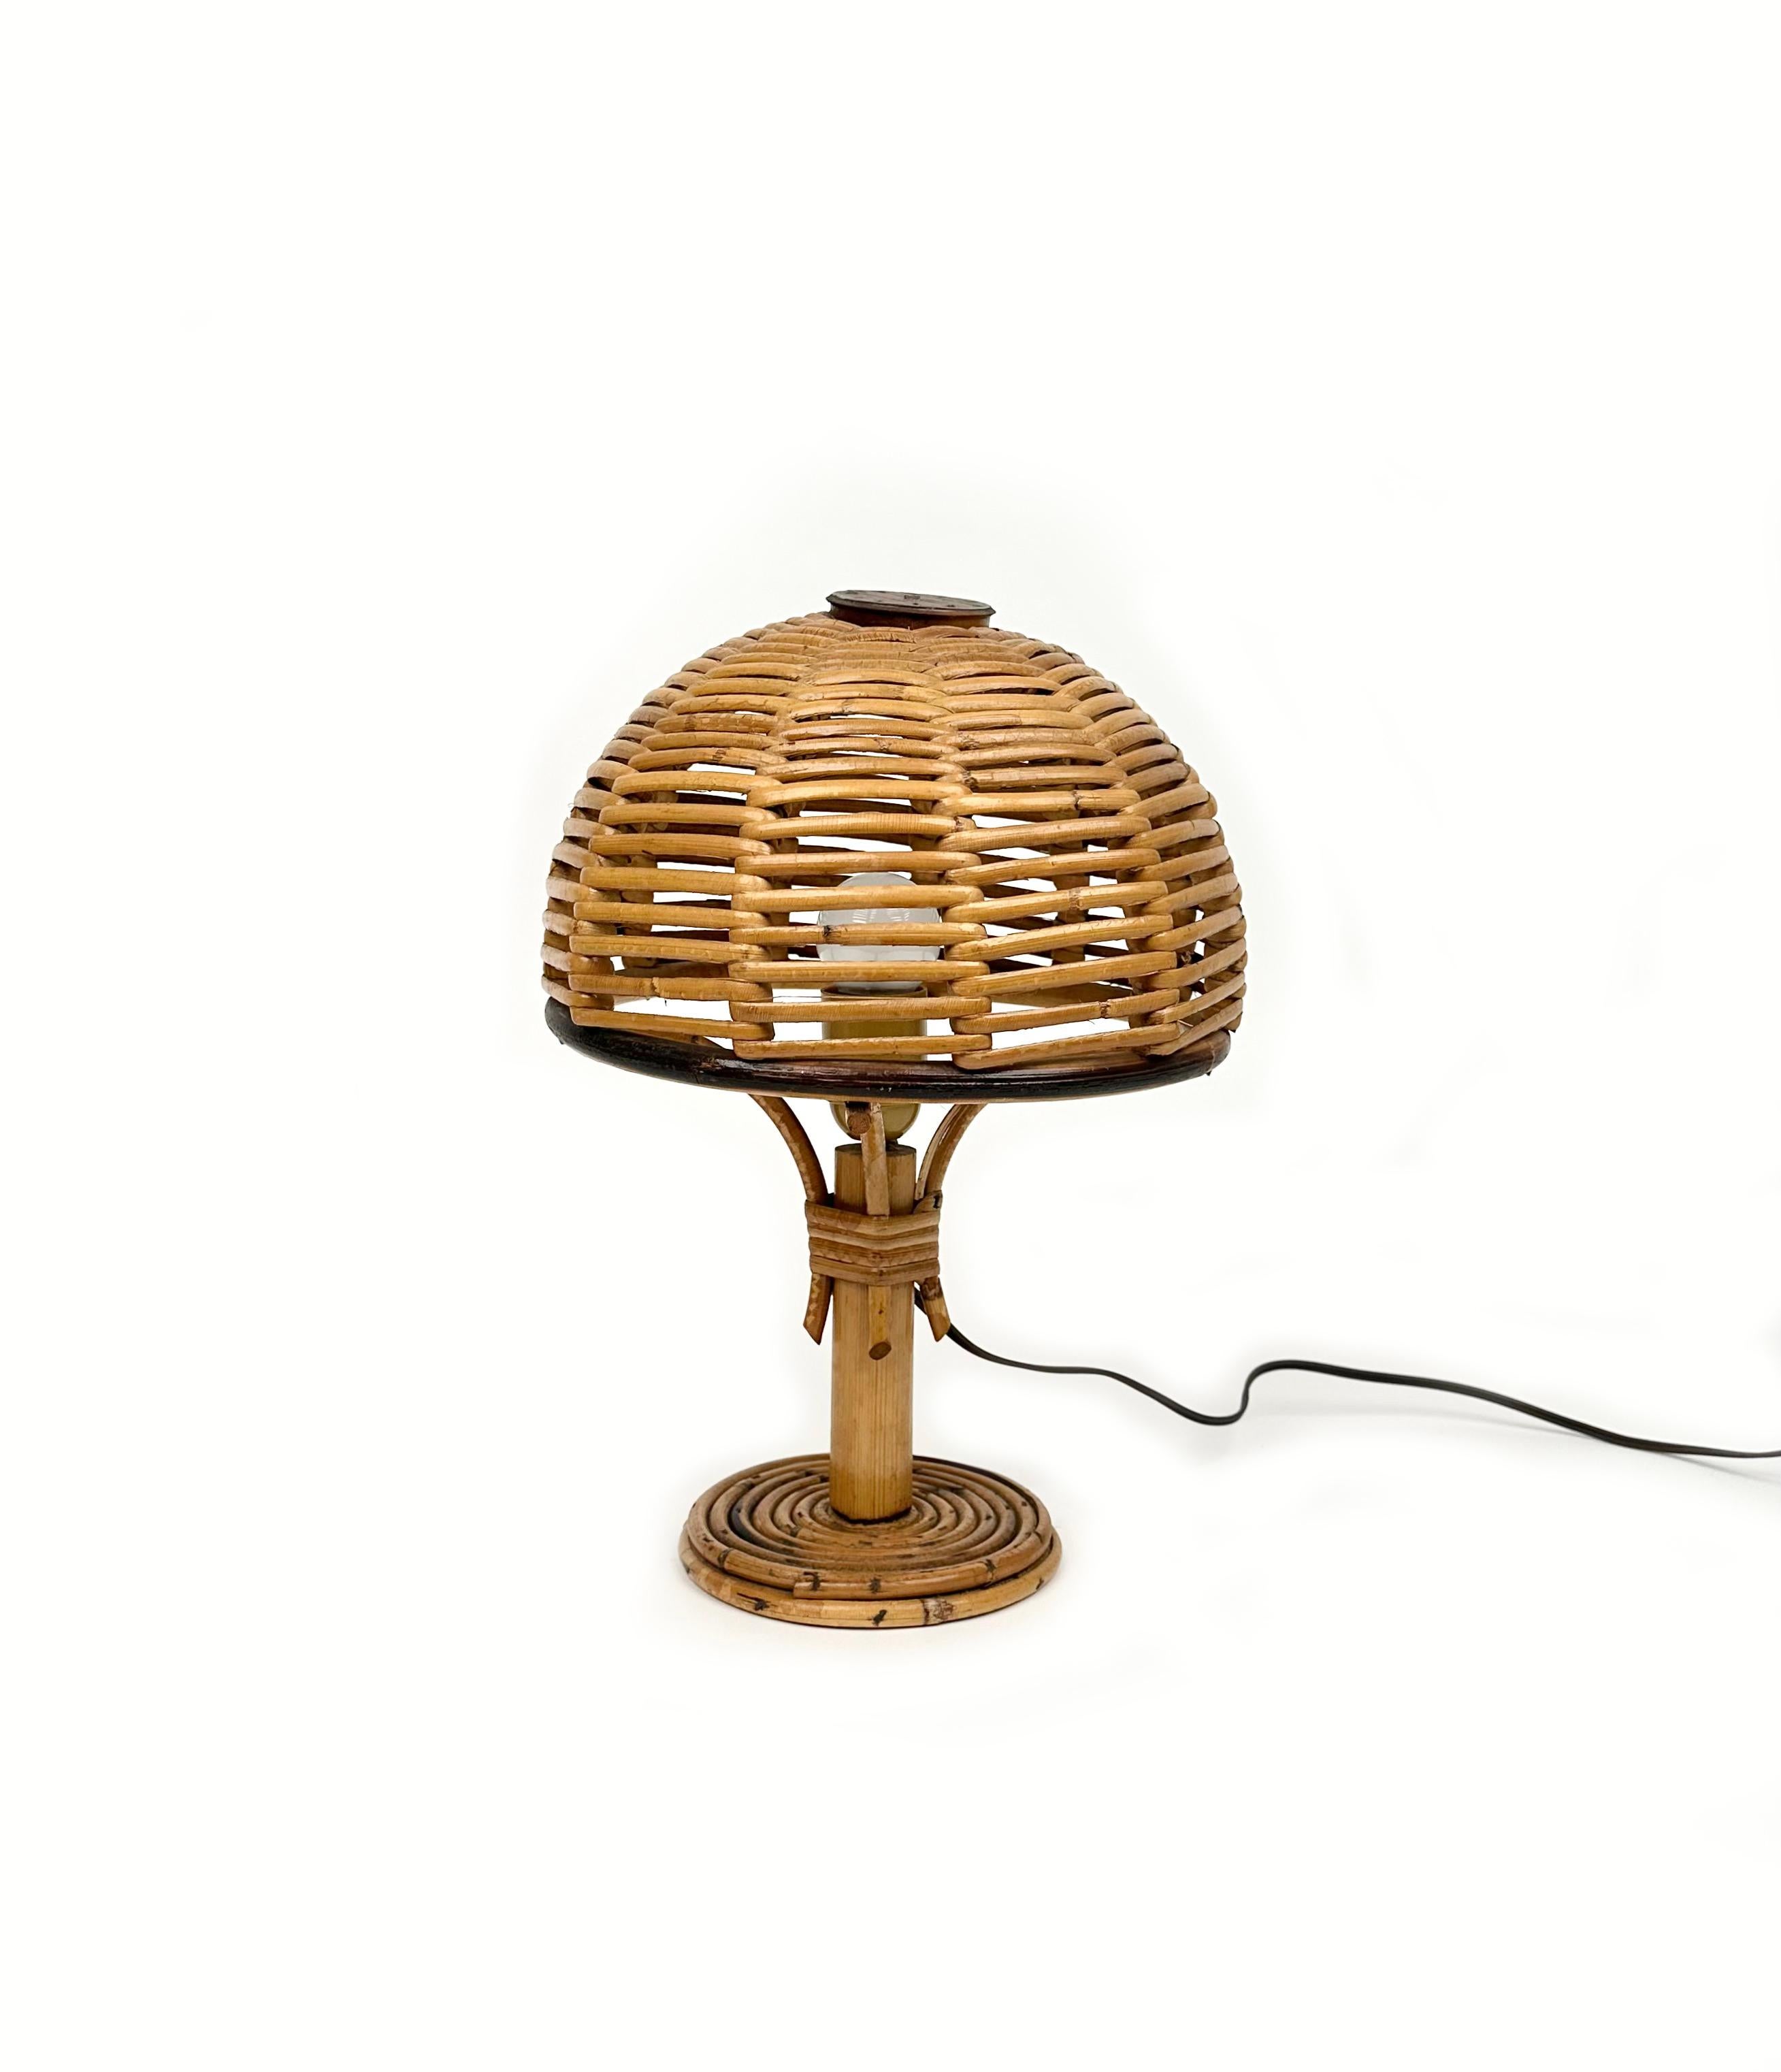 Mid-20th Century Midcentury Bamboo and Rattan Pair of Table Lamps Louis Sognot Style, Italy 1960s For Sale